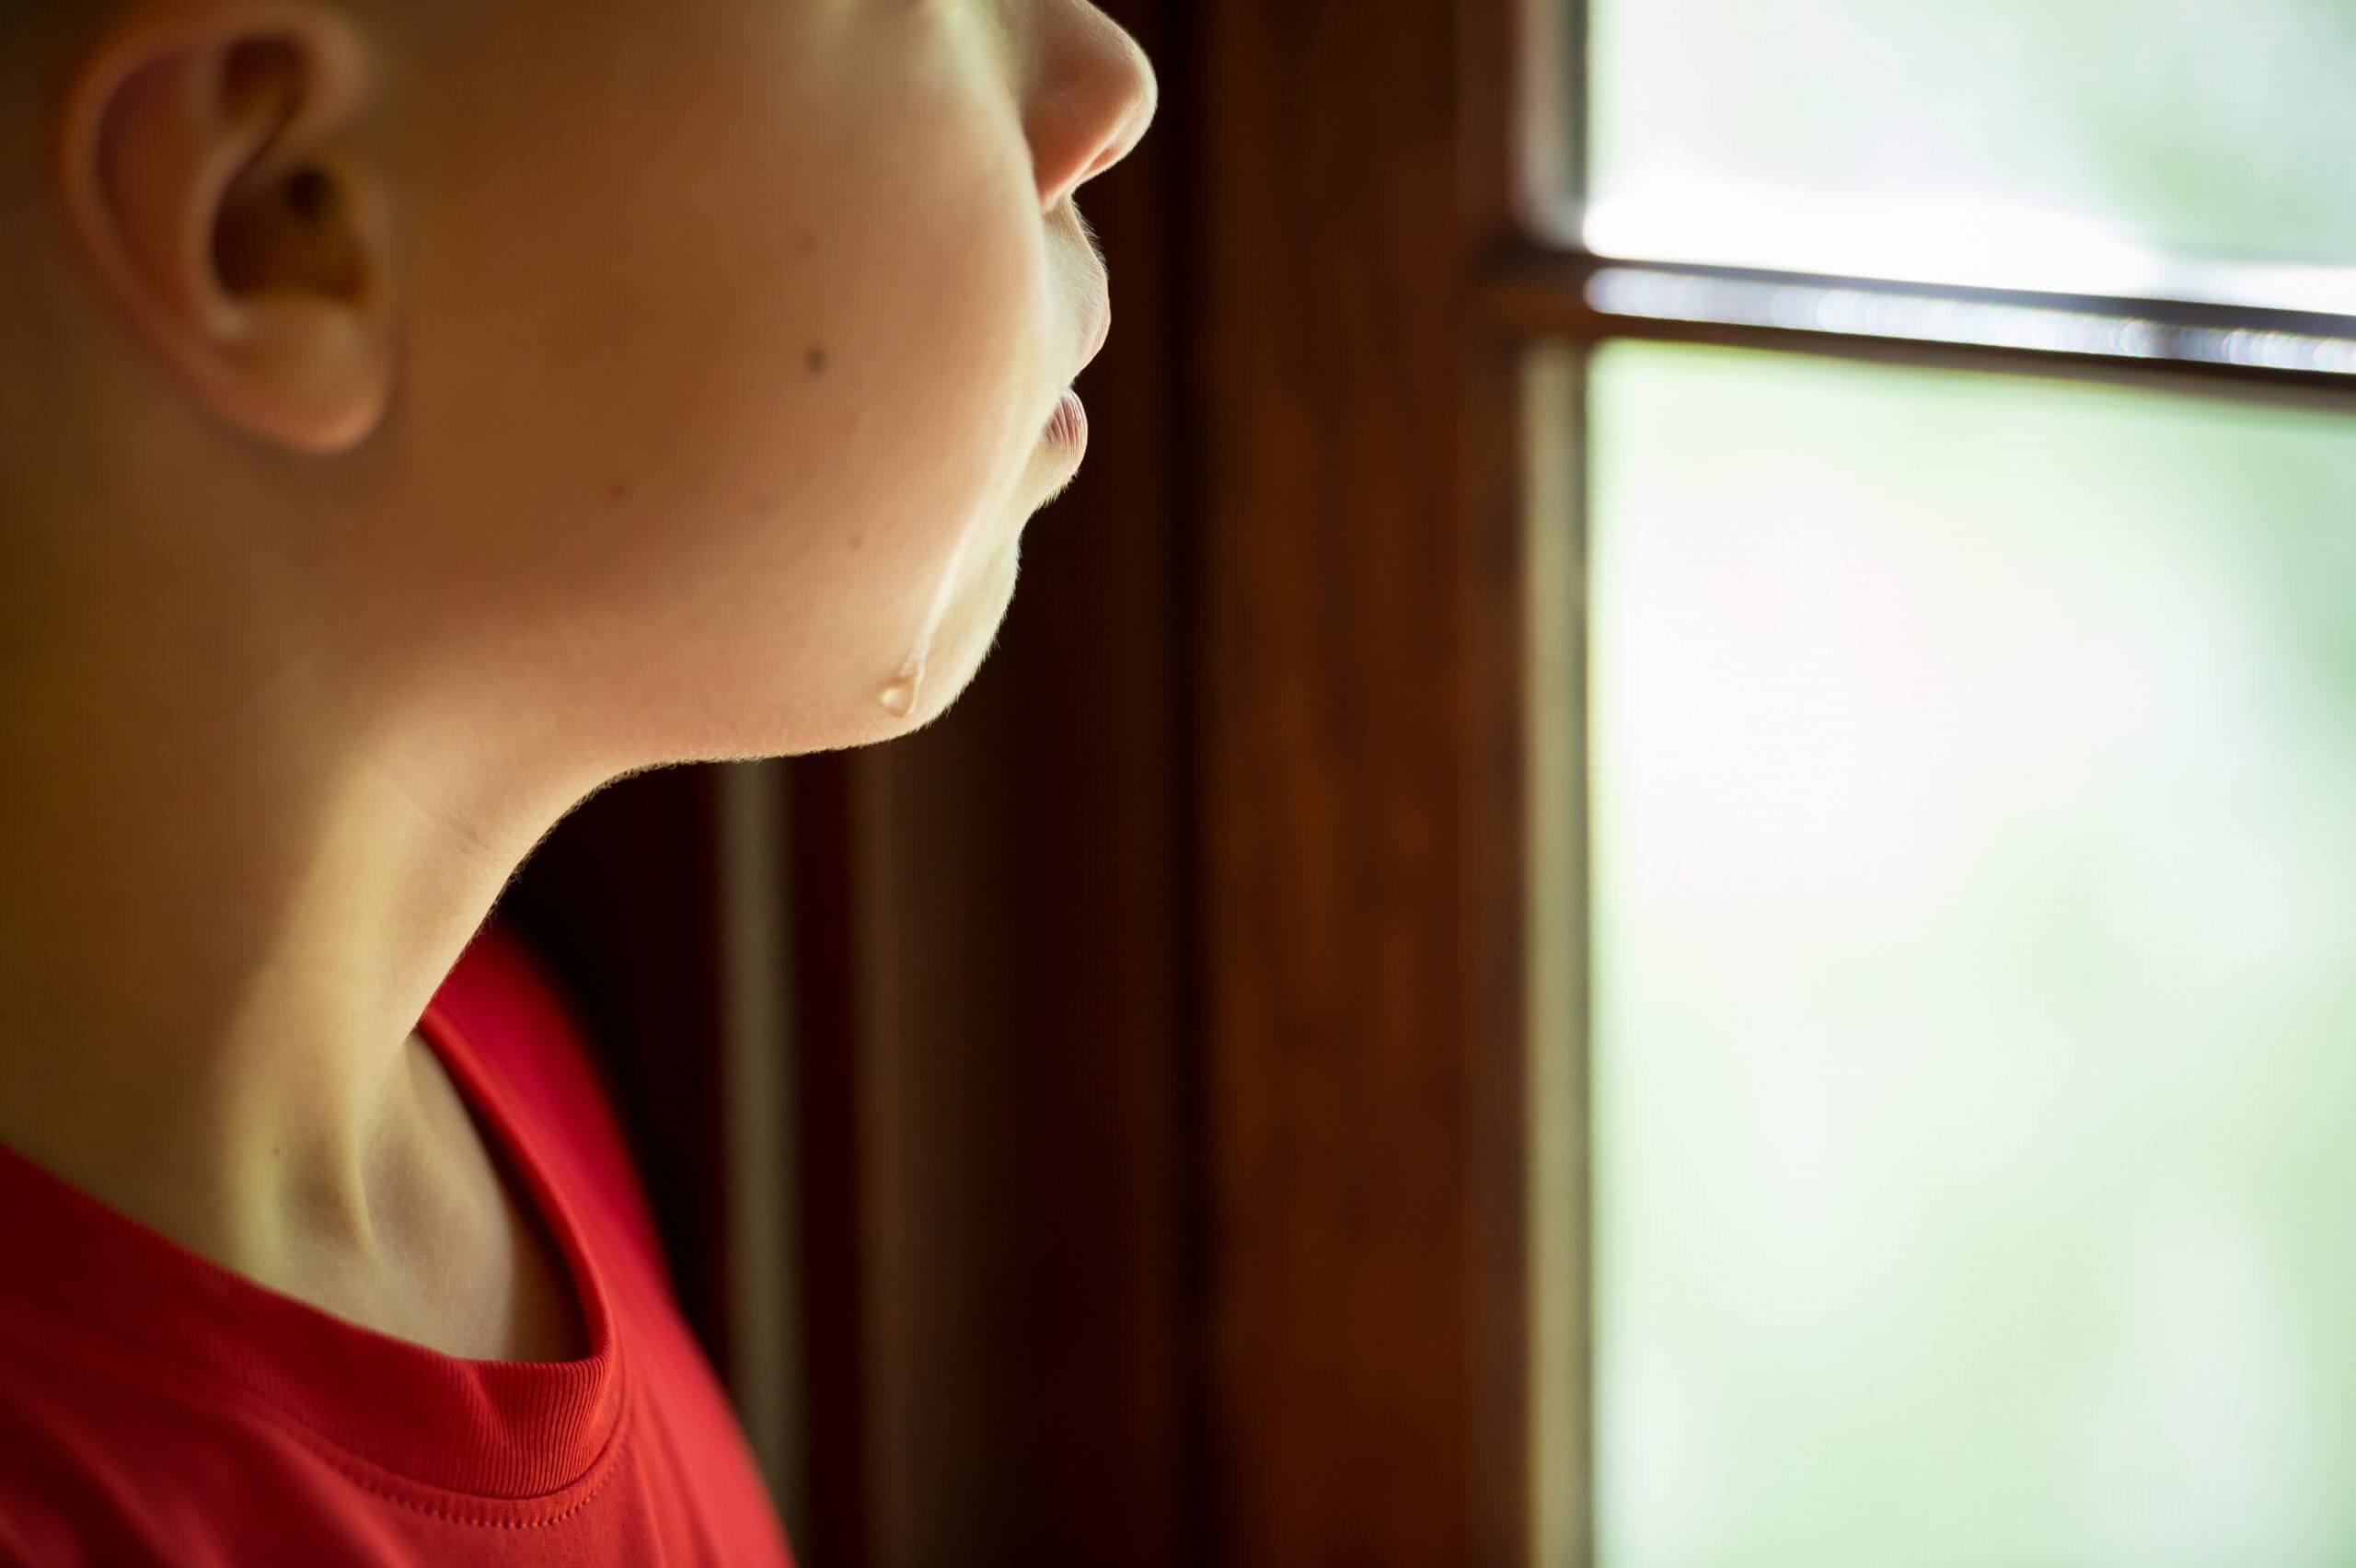 A focused view of a boy's face as he looks out the window. A single tear falls down his face.